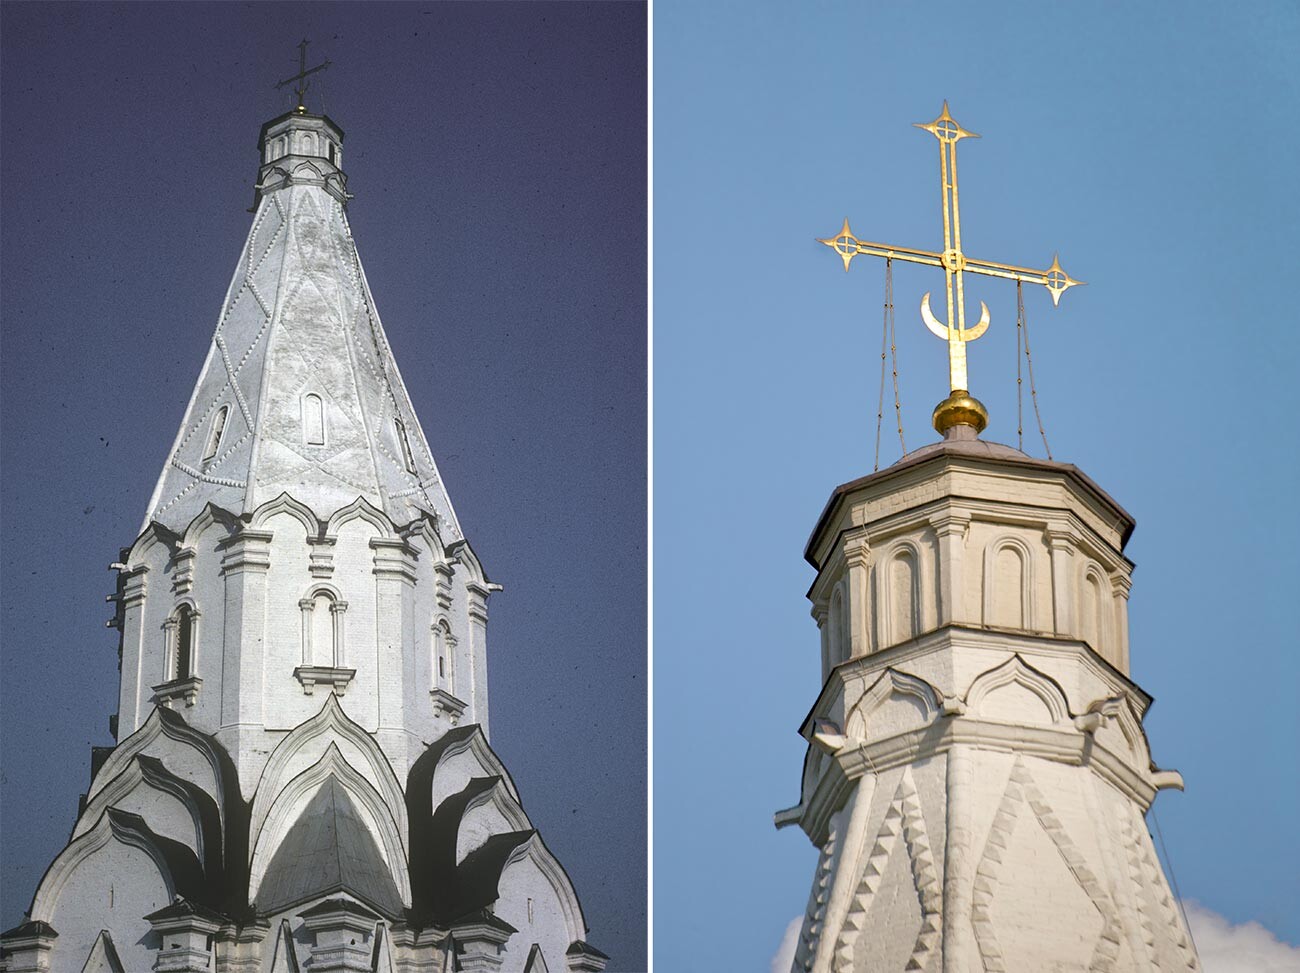 Left: Church of the Ascension. Tower structure, southwest view. March 29, 1980.
Right: Top of tower with lantern & cross, west view. June 8, 2014